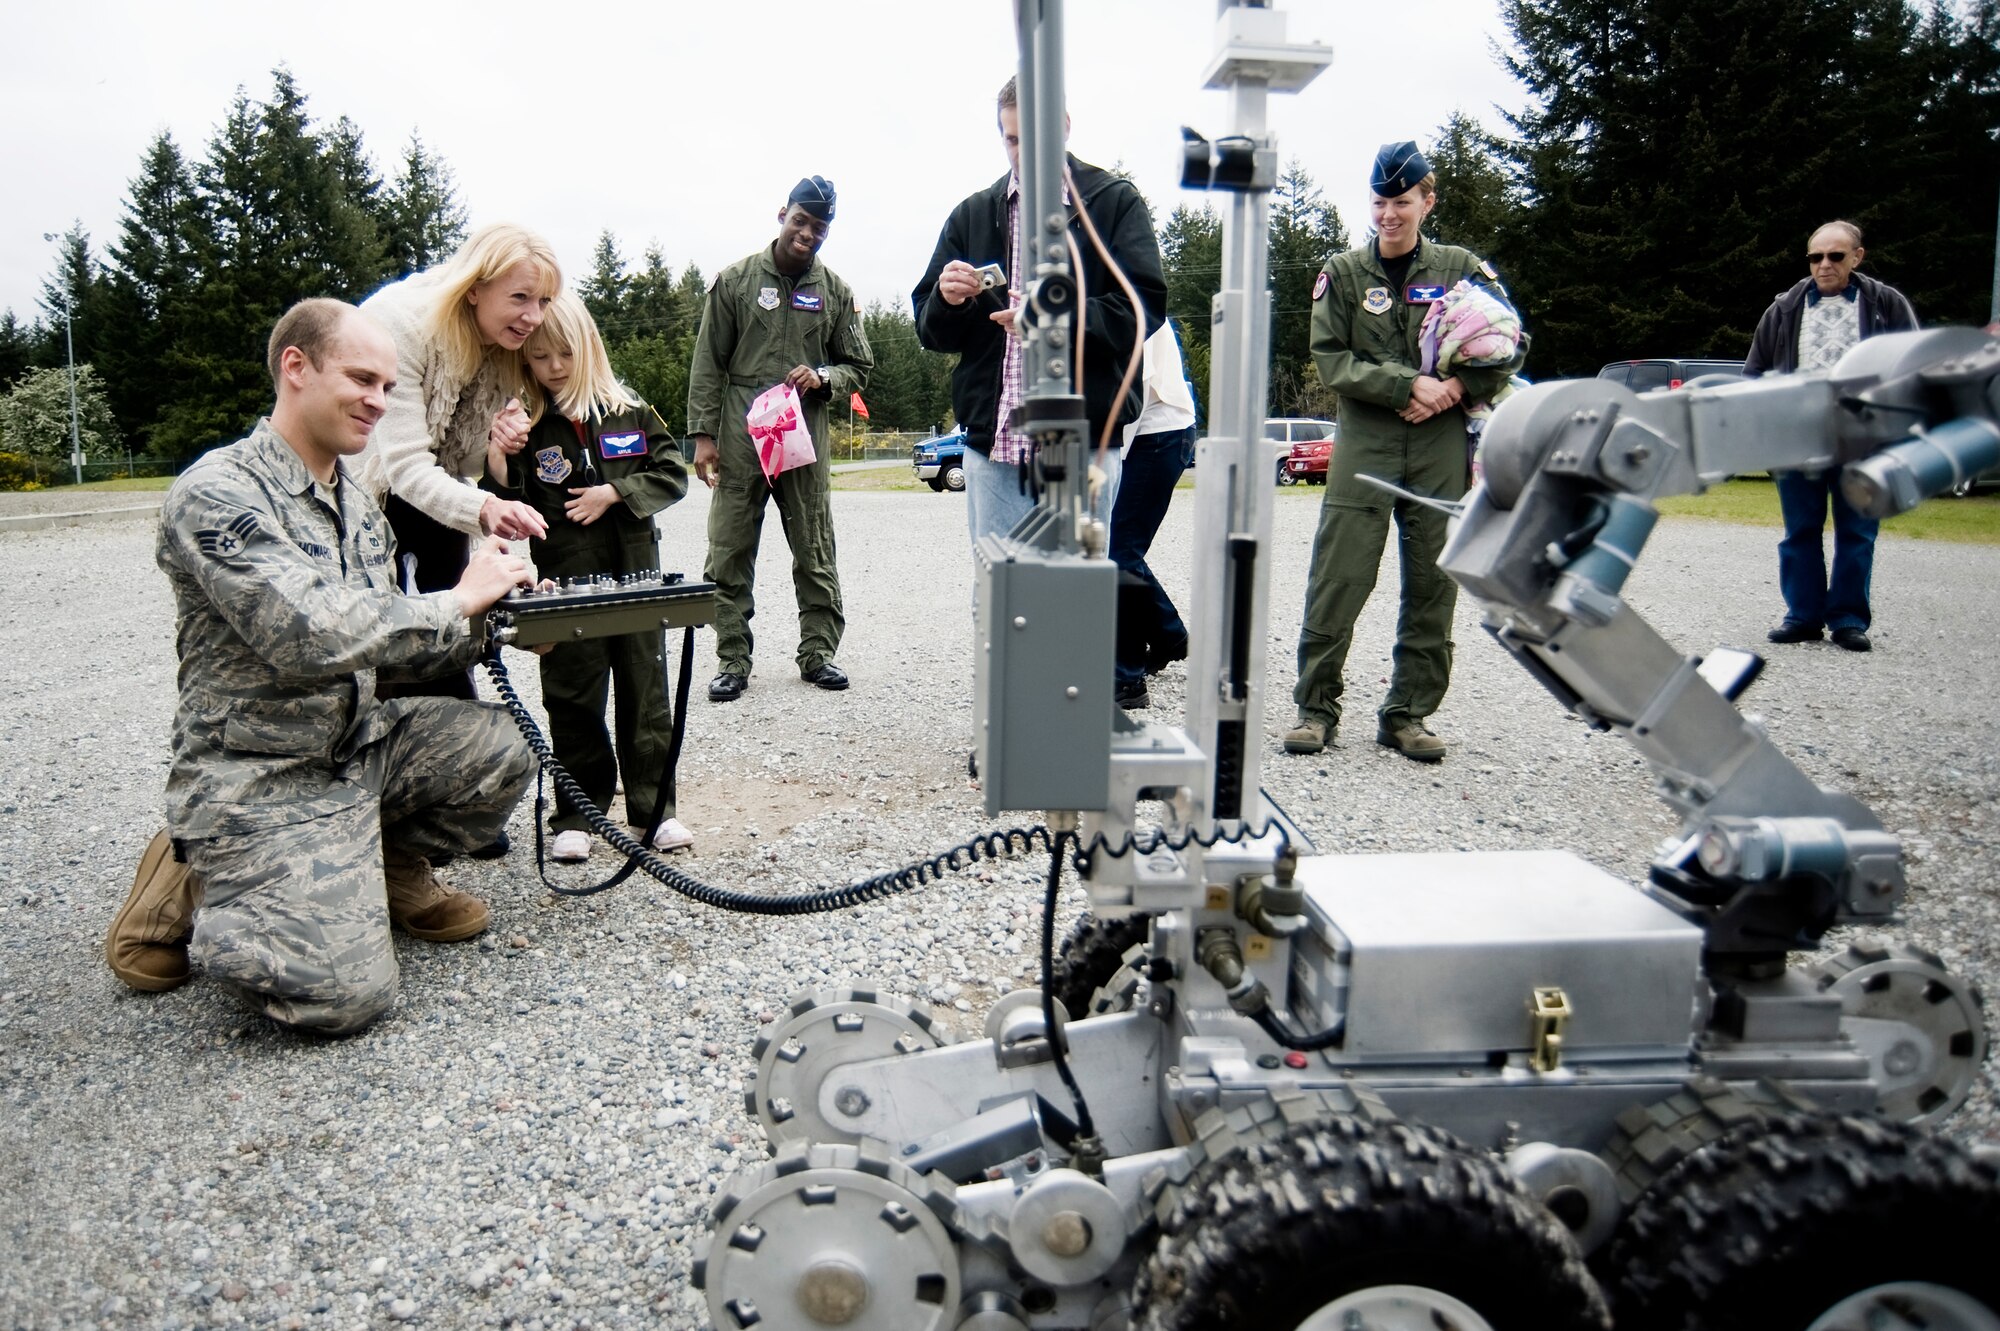 Pilot for a Day candidate Kaylie Bergen, age 6, and her family look on as Senior Airman Nathan Howard, 62nd Civil Engineer Squadron, demonstrates the capabilities of an EOD robot May 11. (U.S. Air Force Photo by Abner Guzman)
